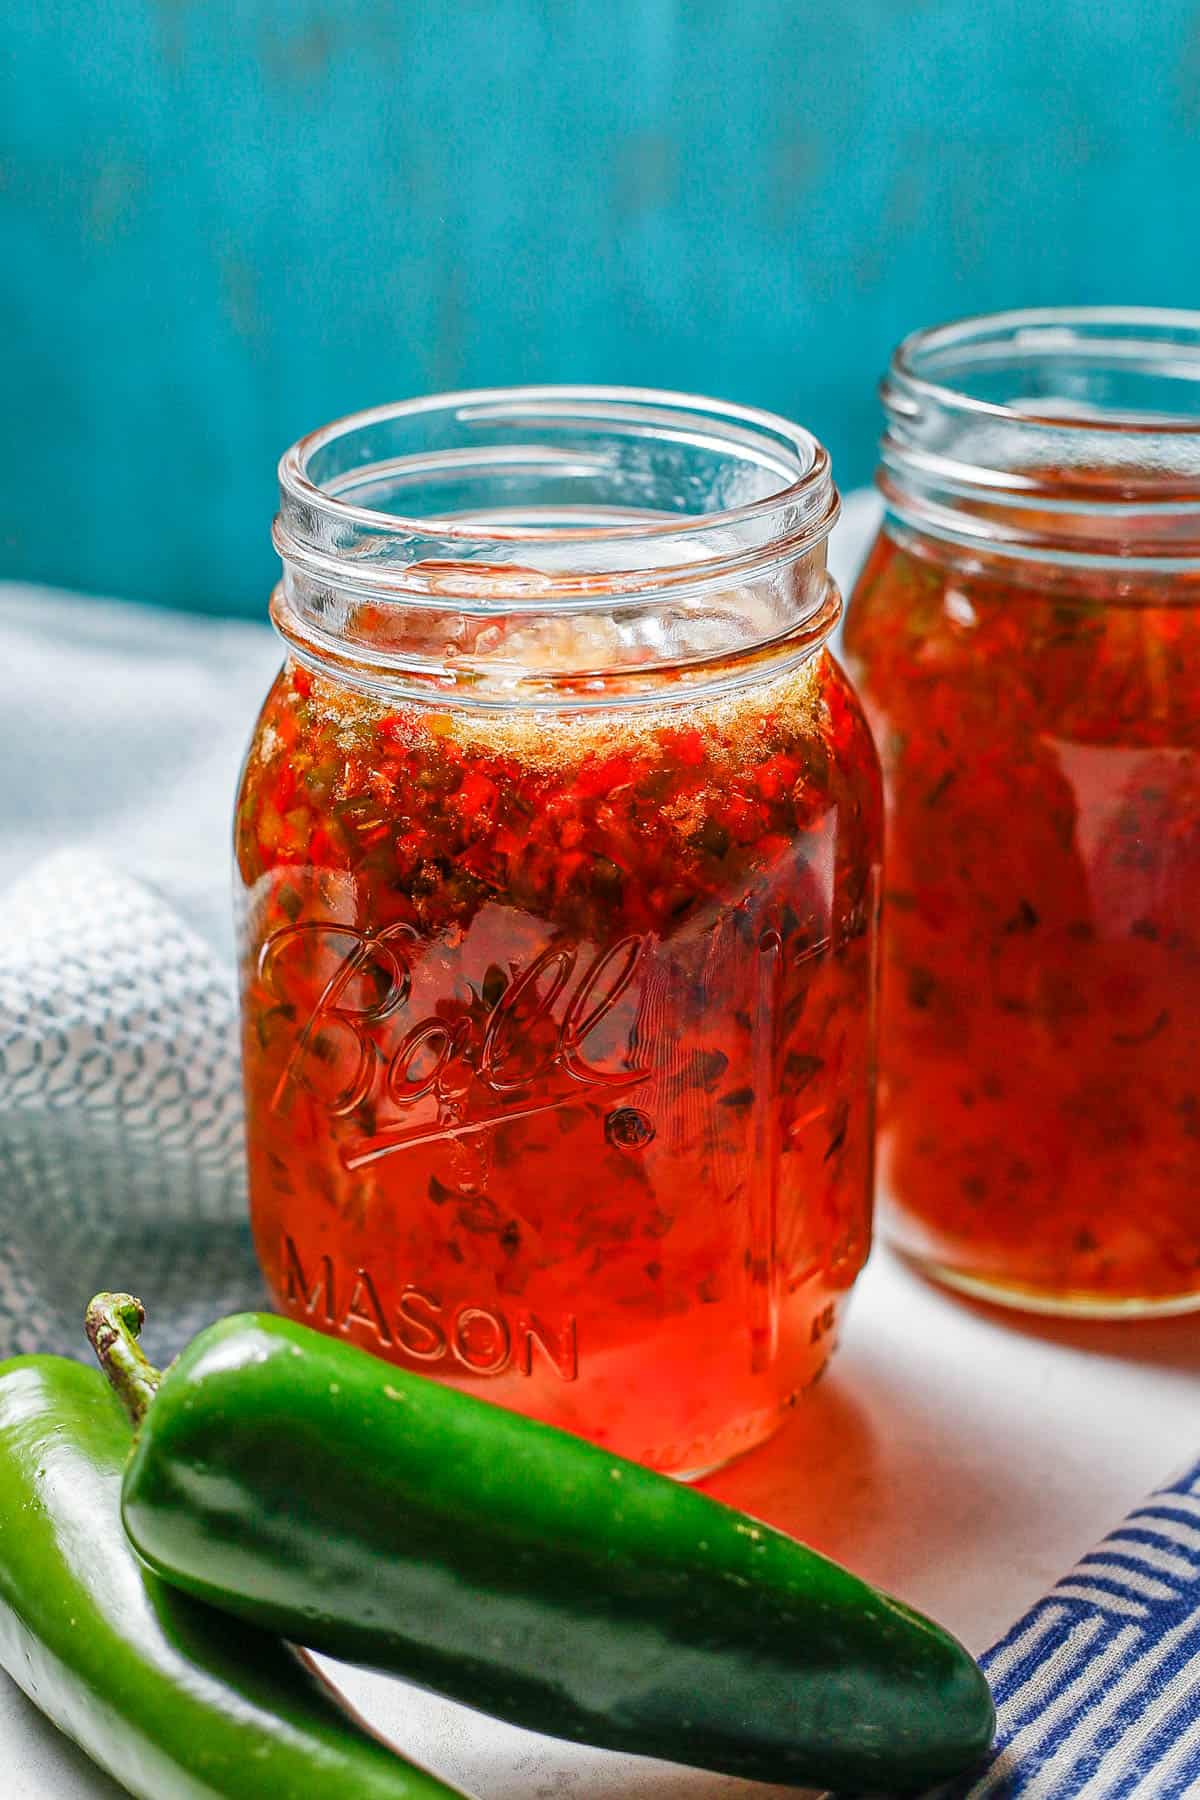 Jalapeno pepper jelly in a glass jar before it's cooled and set up.